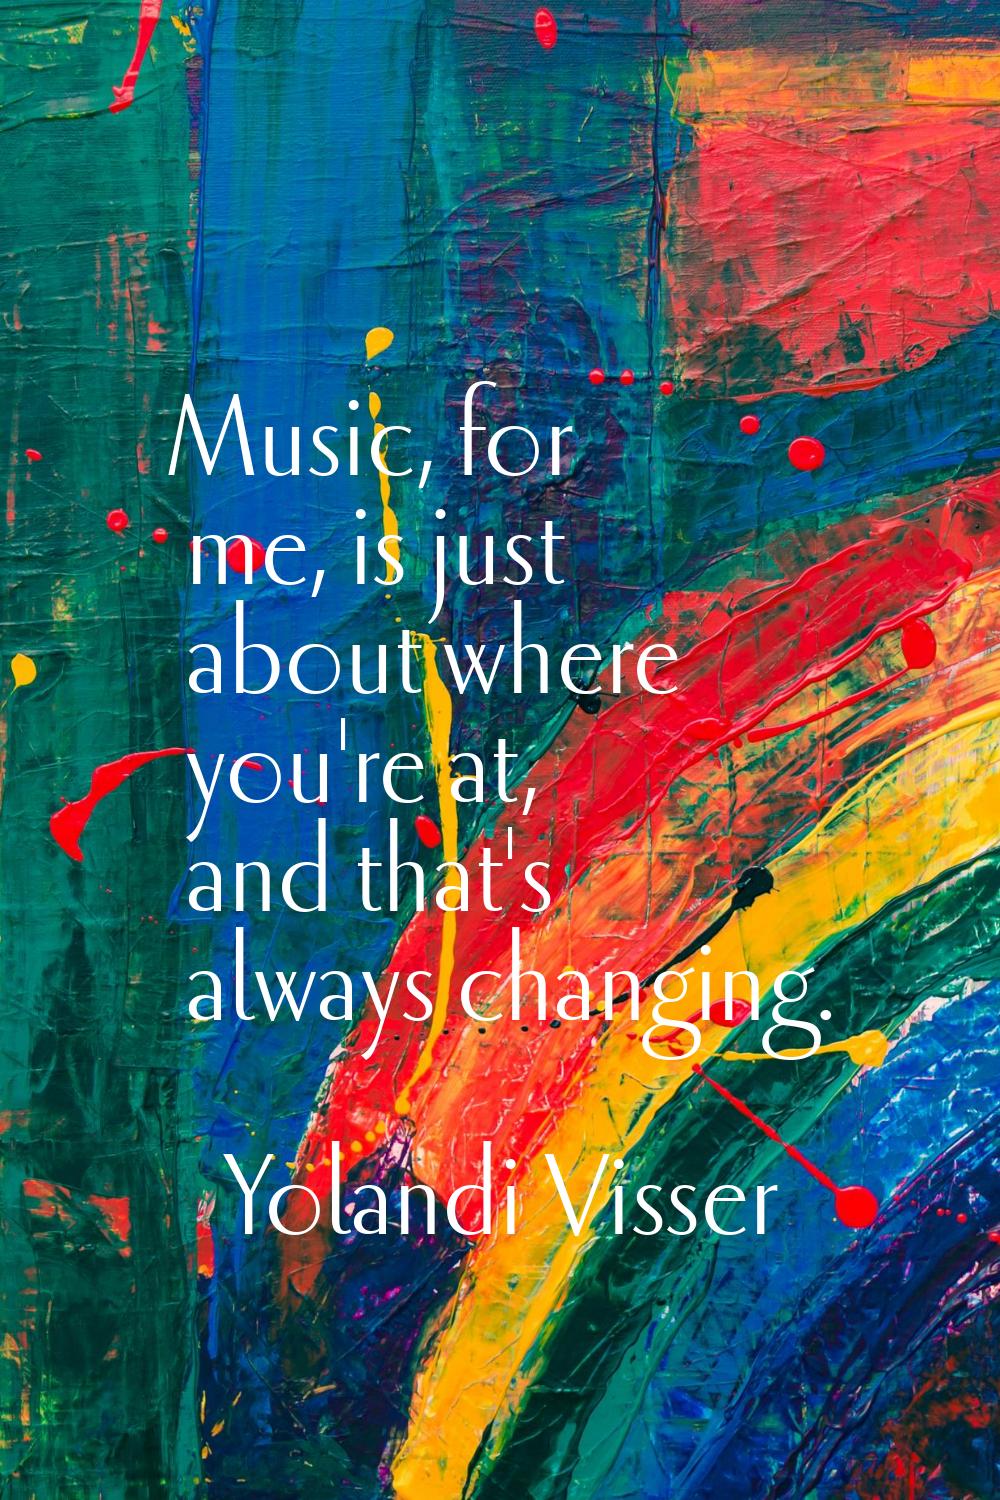 Music, for me, is just about where you're at, and that's always changing.